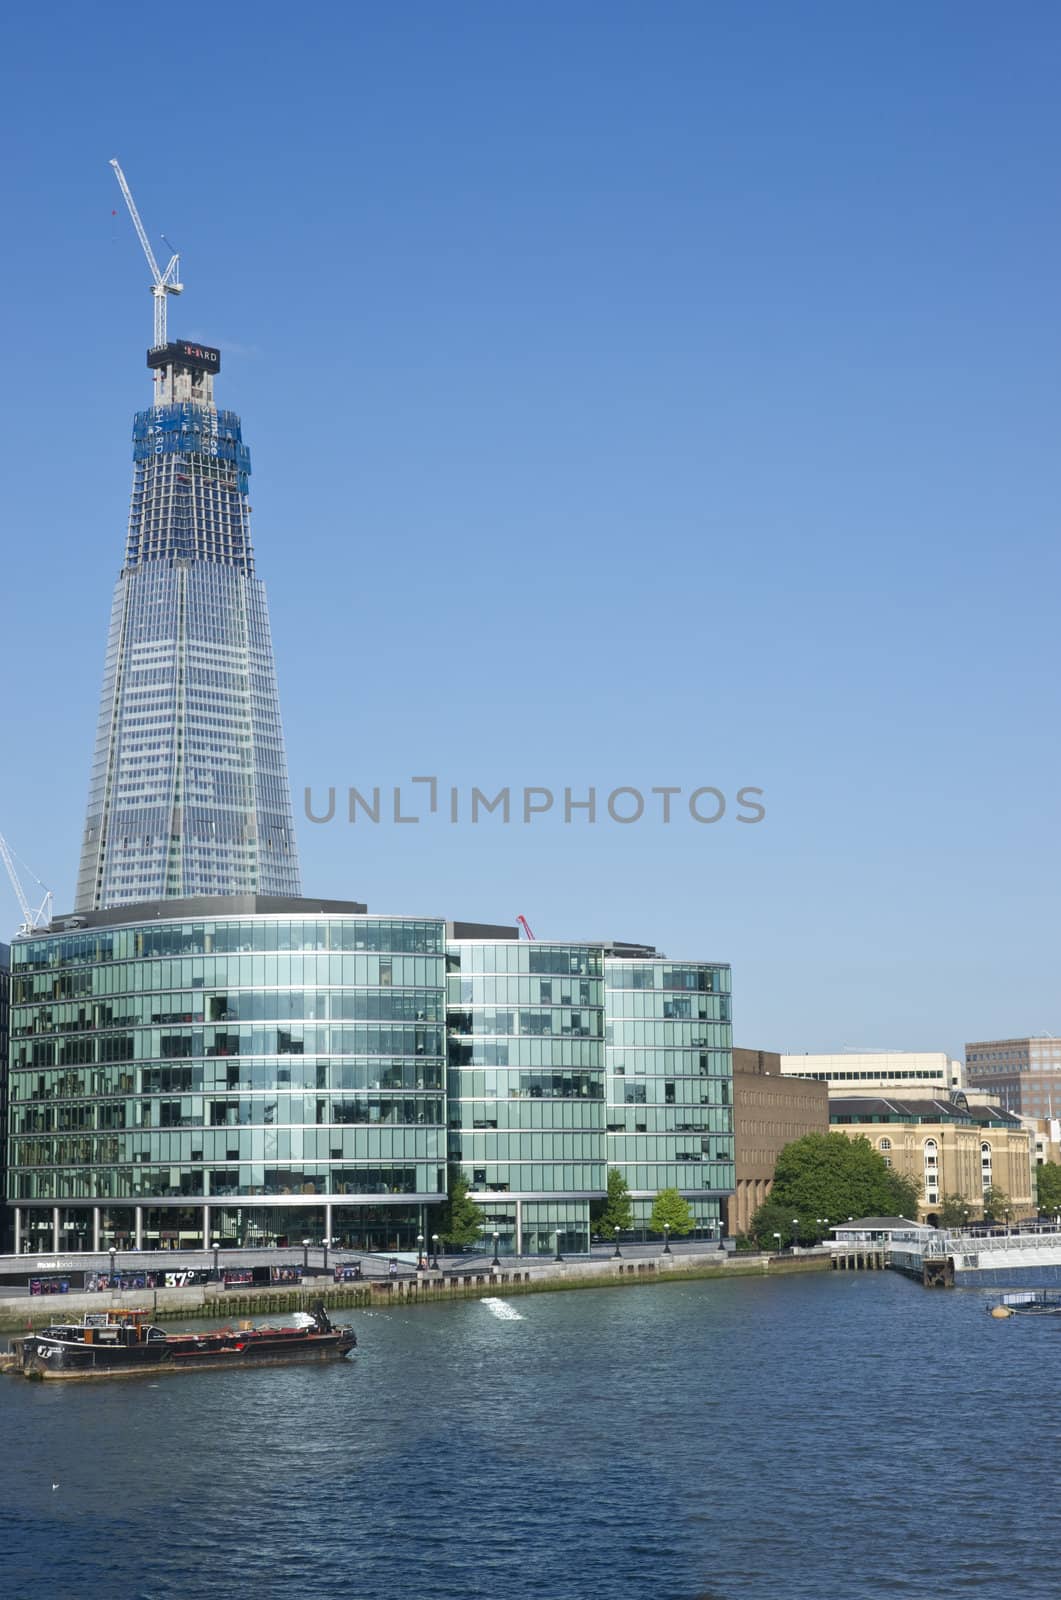 The Shard under construction at London Bridge on the River Thames in London, England. When complete it will be the tallest building in the European Union.